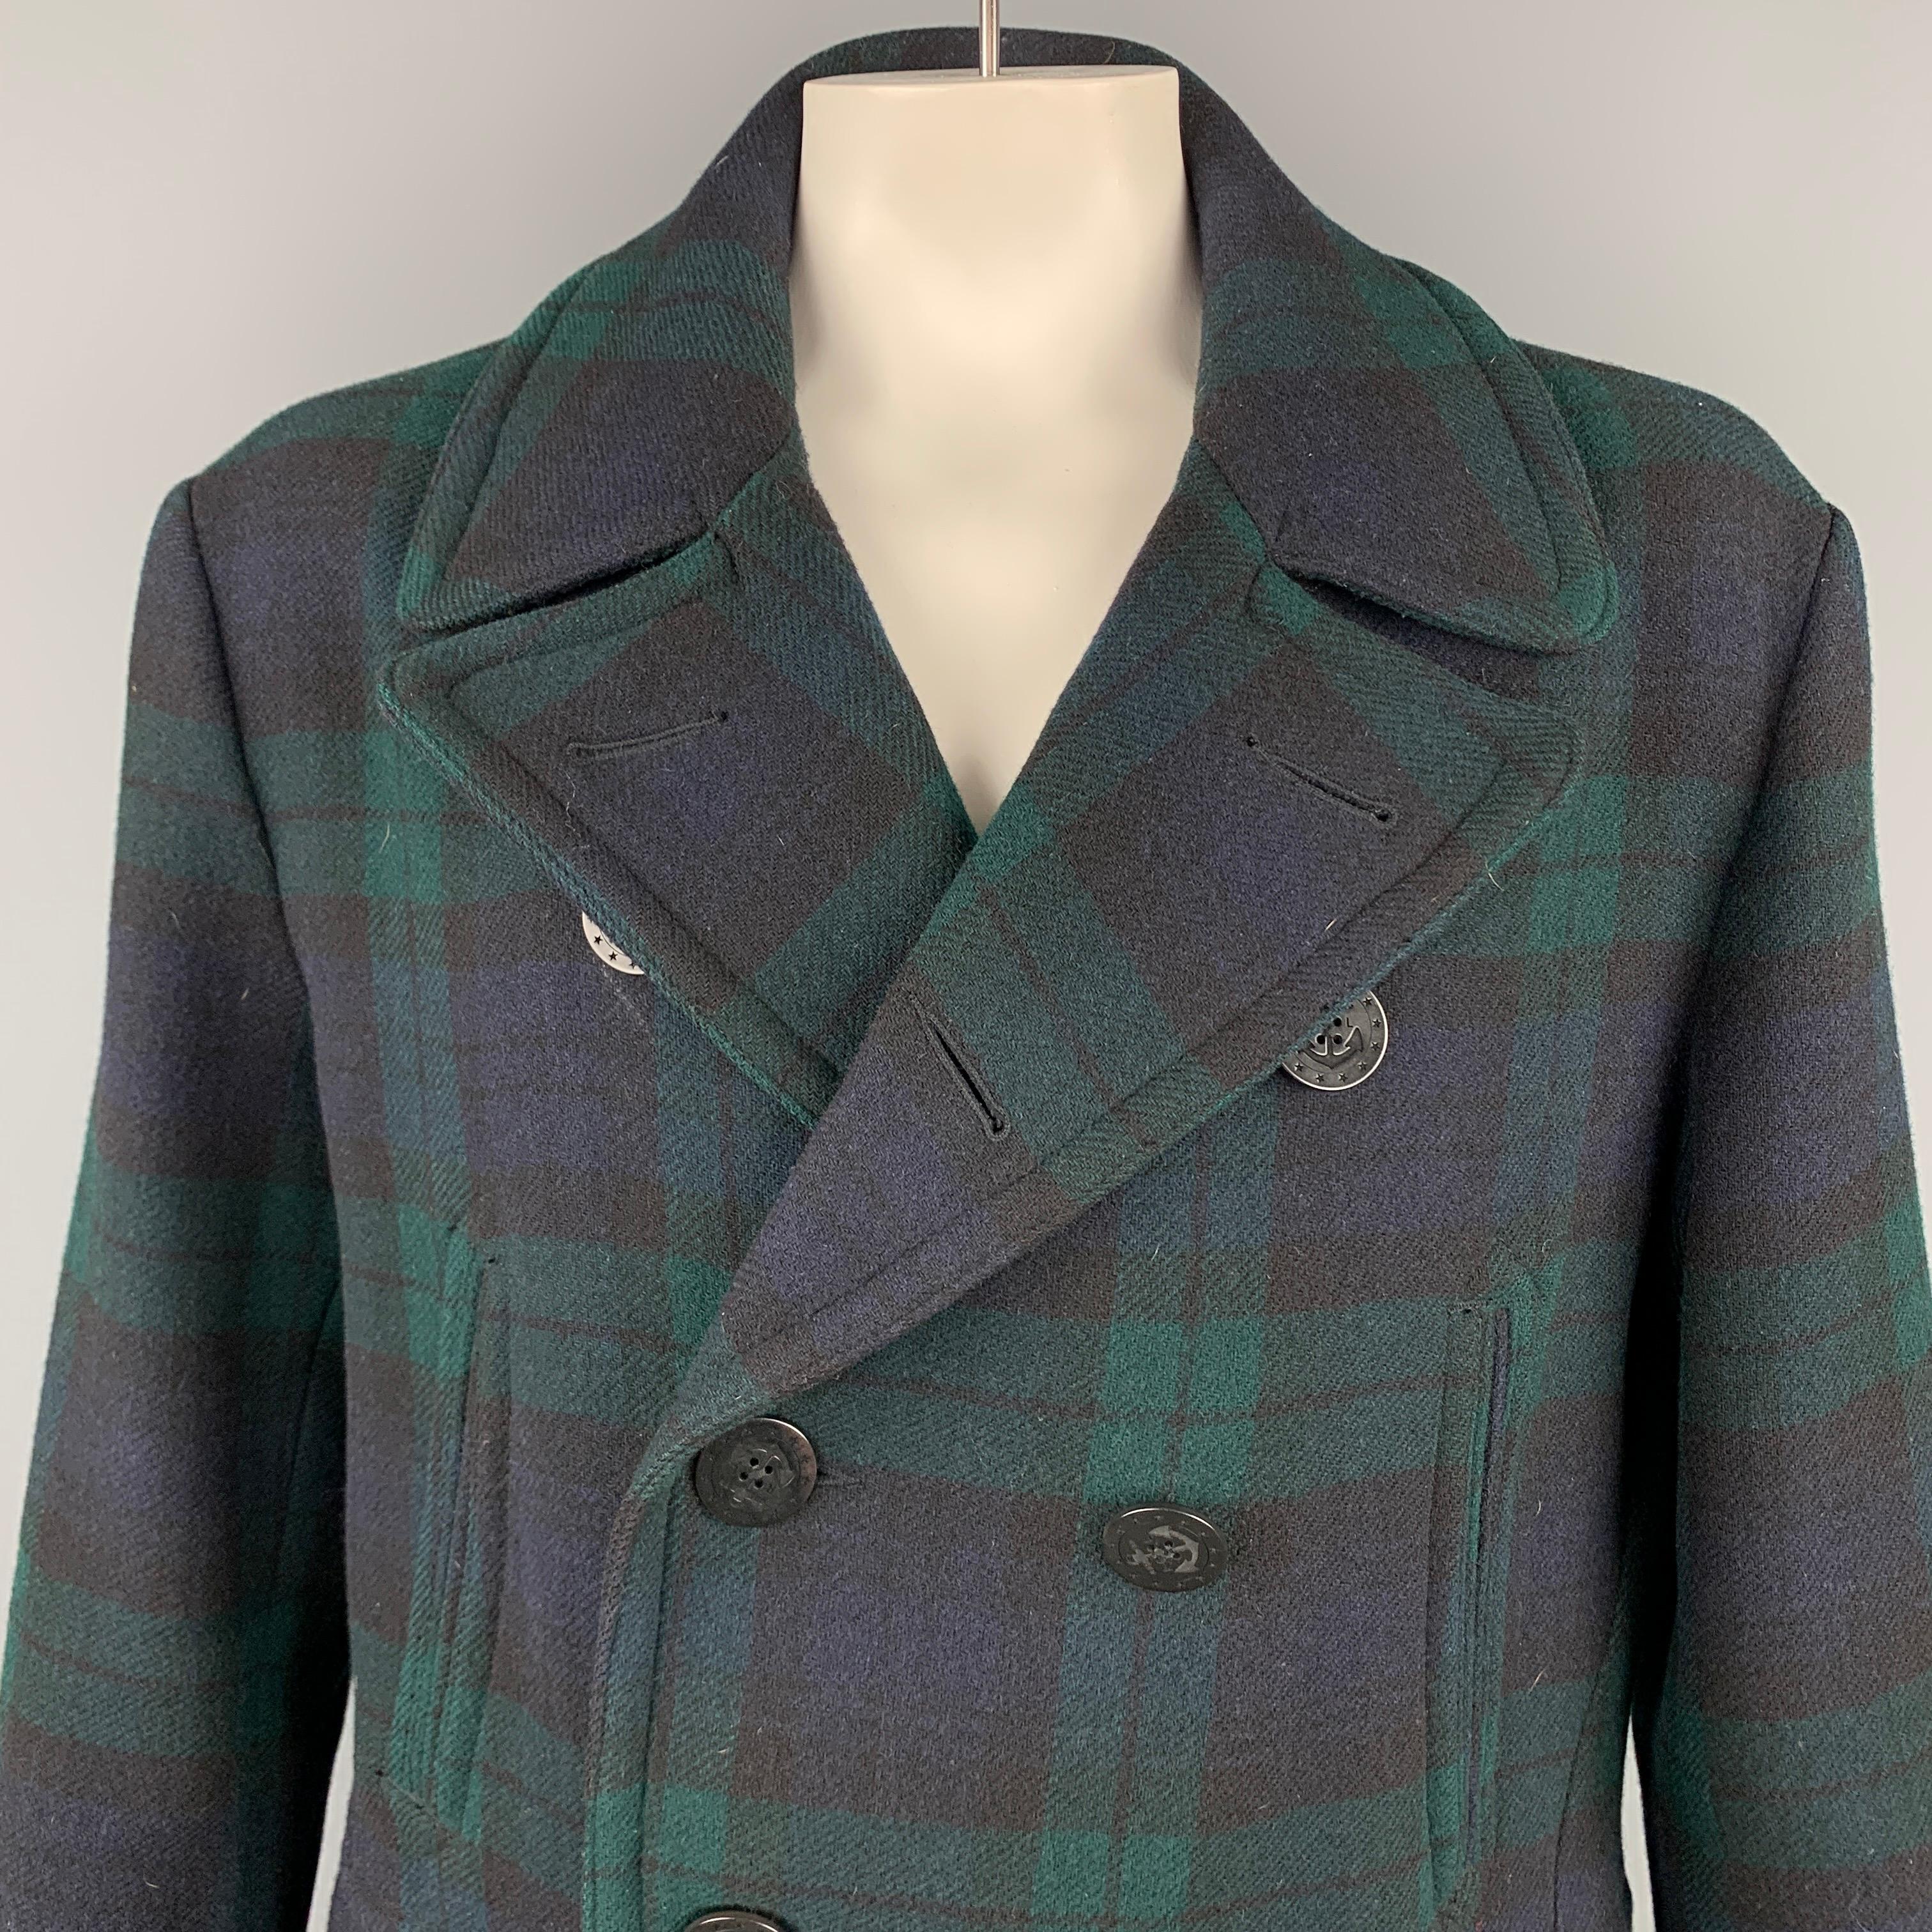 POLO by RALPH LAUREN peacoat comes in a blachwatch plaid wool with no liner featuring slit pockets, flap pockets, spread collar, and a double breasted closure. 

Very Good Pre-Owned Condition.
Marked: XL

Measurements:

Shoulder: 21 in.
Chest: 48